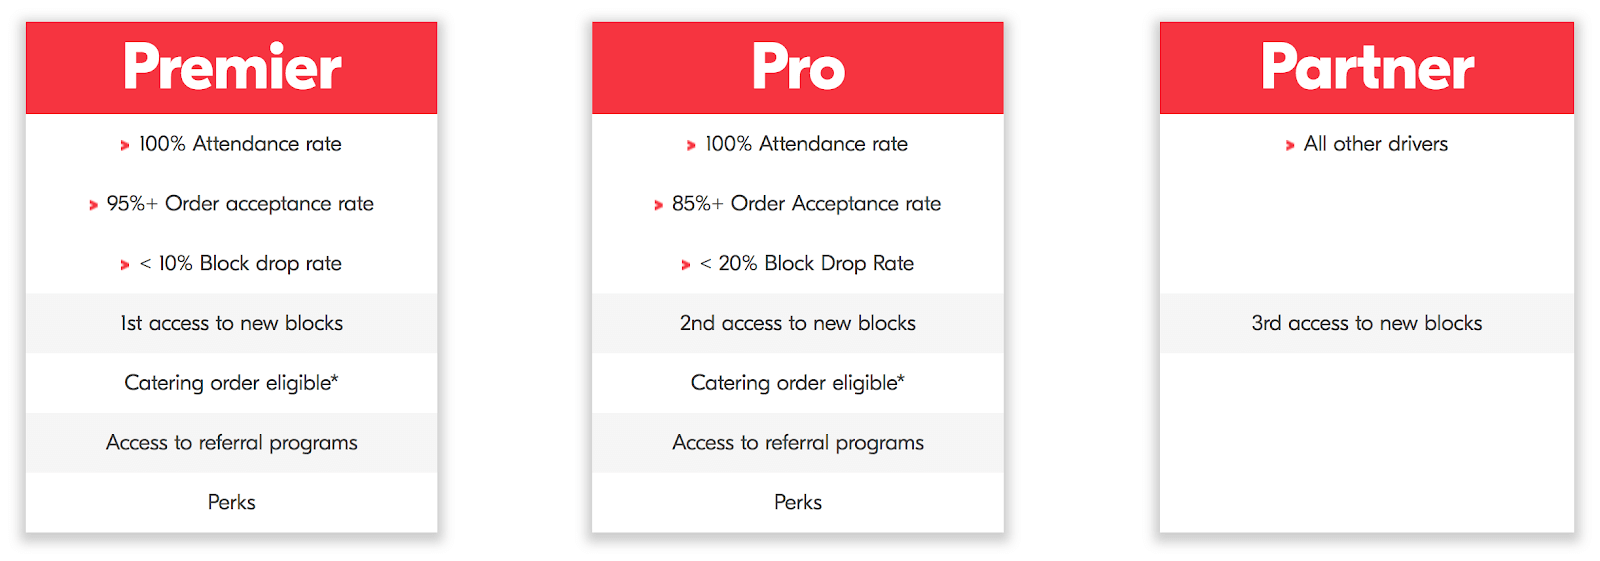 Grubhub Pay: Premier, pro, and partner qualifications